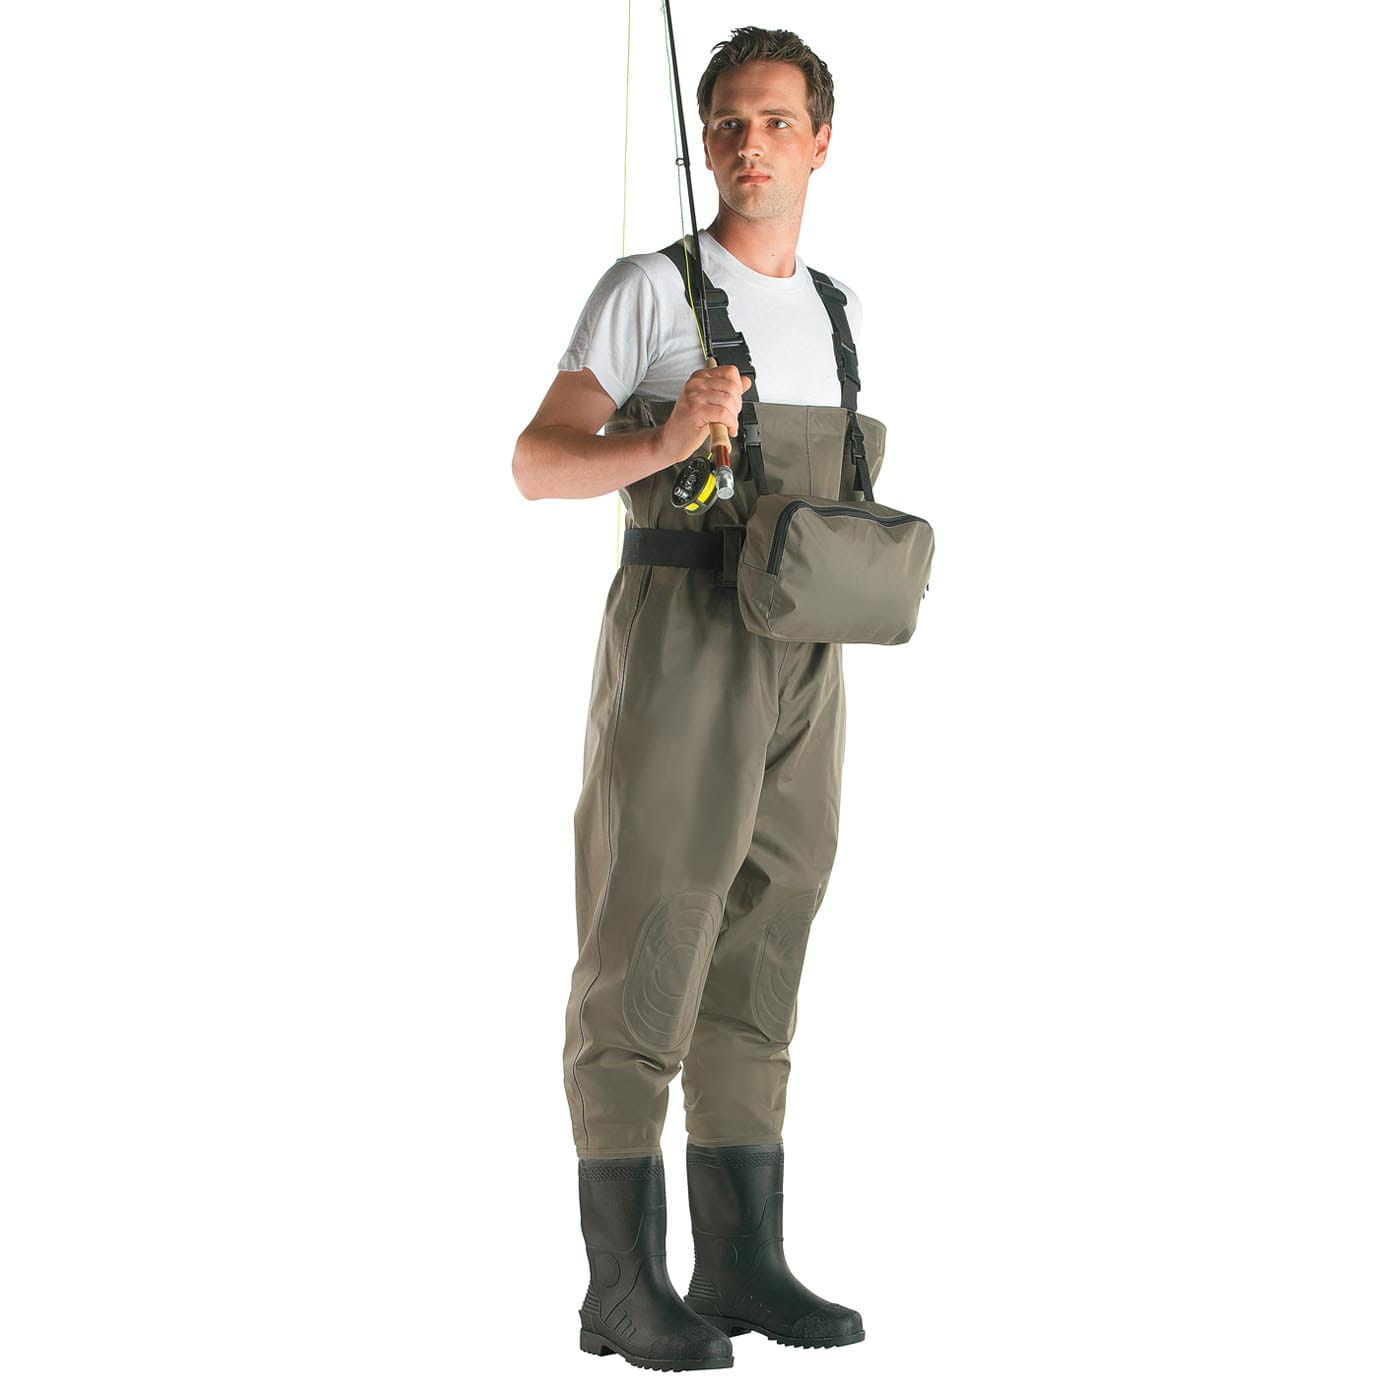 Buy 41-46 size Men's fishing waders Chest-high wader with wading